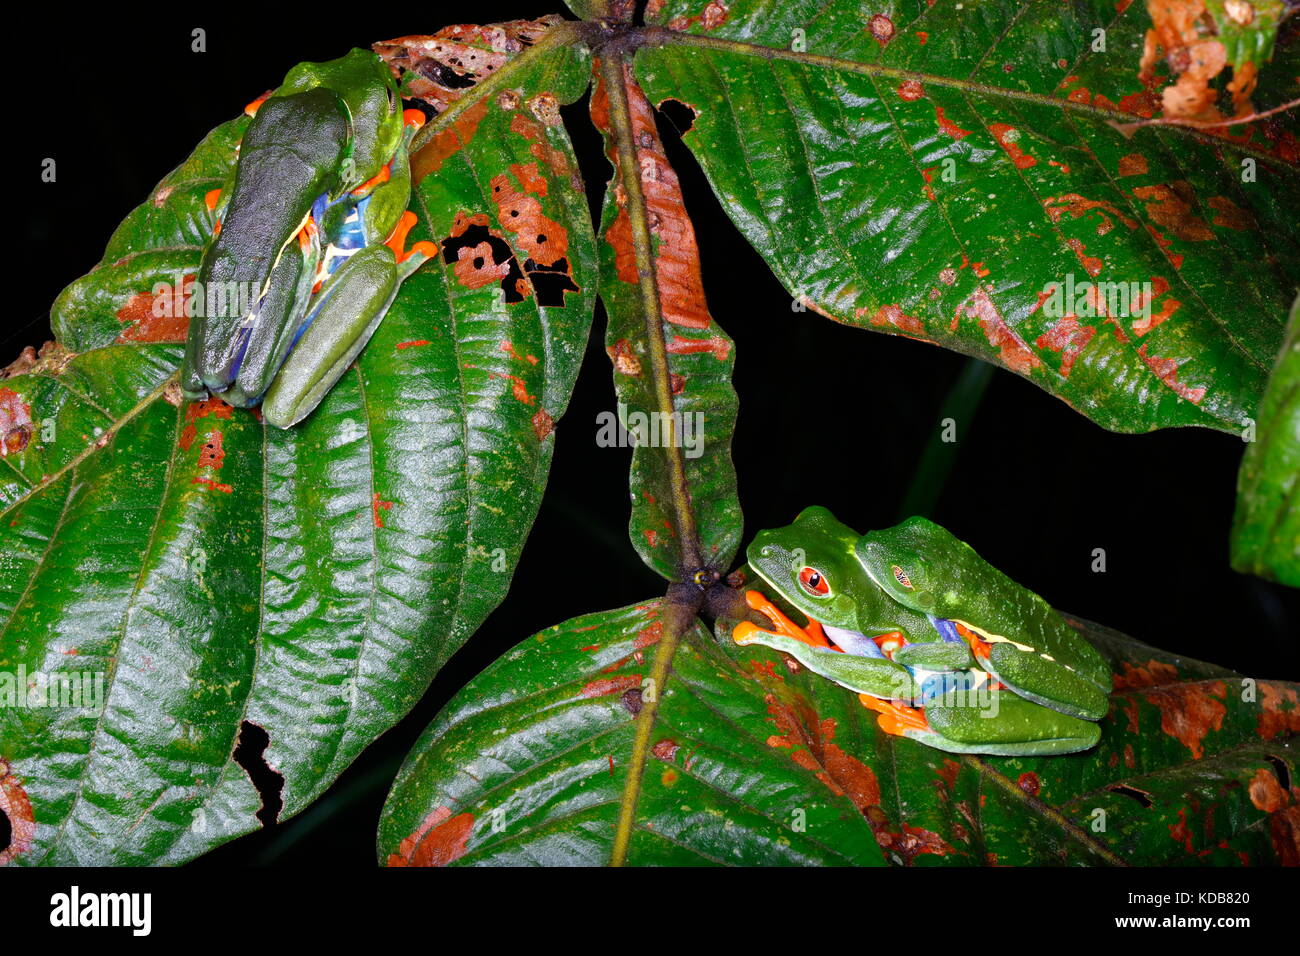 Red-eyed tree frogs, Agalychnis callidryas, resting on plants near rain pools at night. Stock Photo